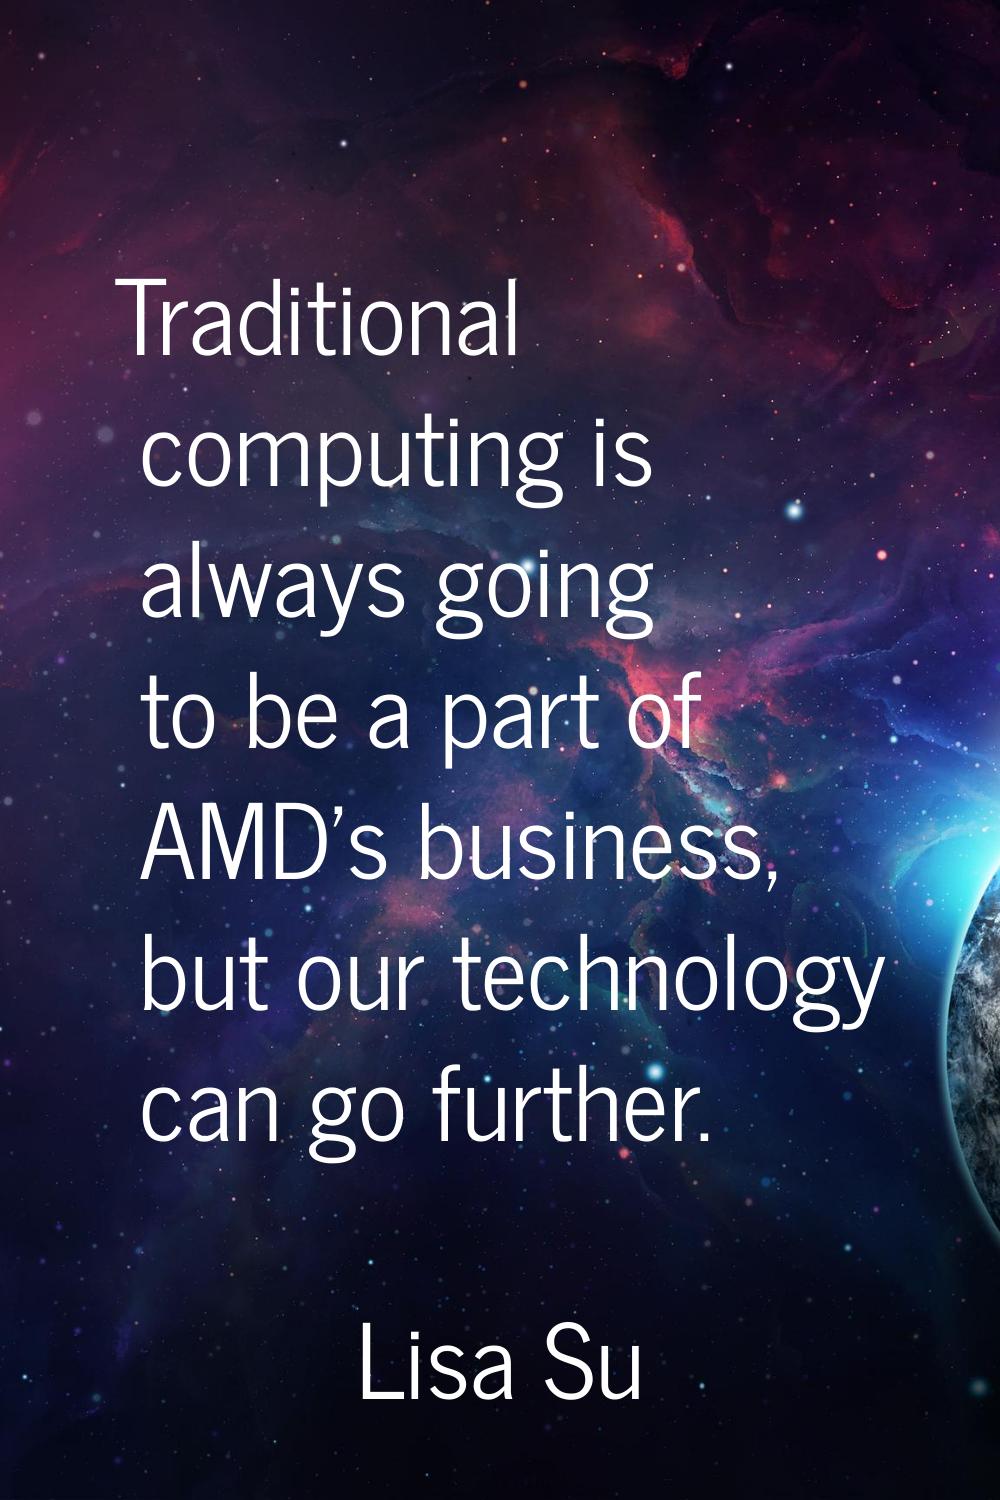 Traditional computing is always going to be a part of AMD's business, but our technology can go fur